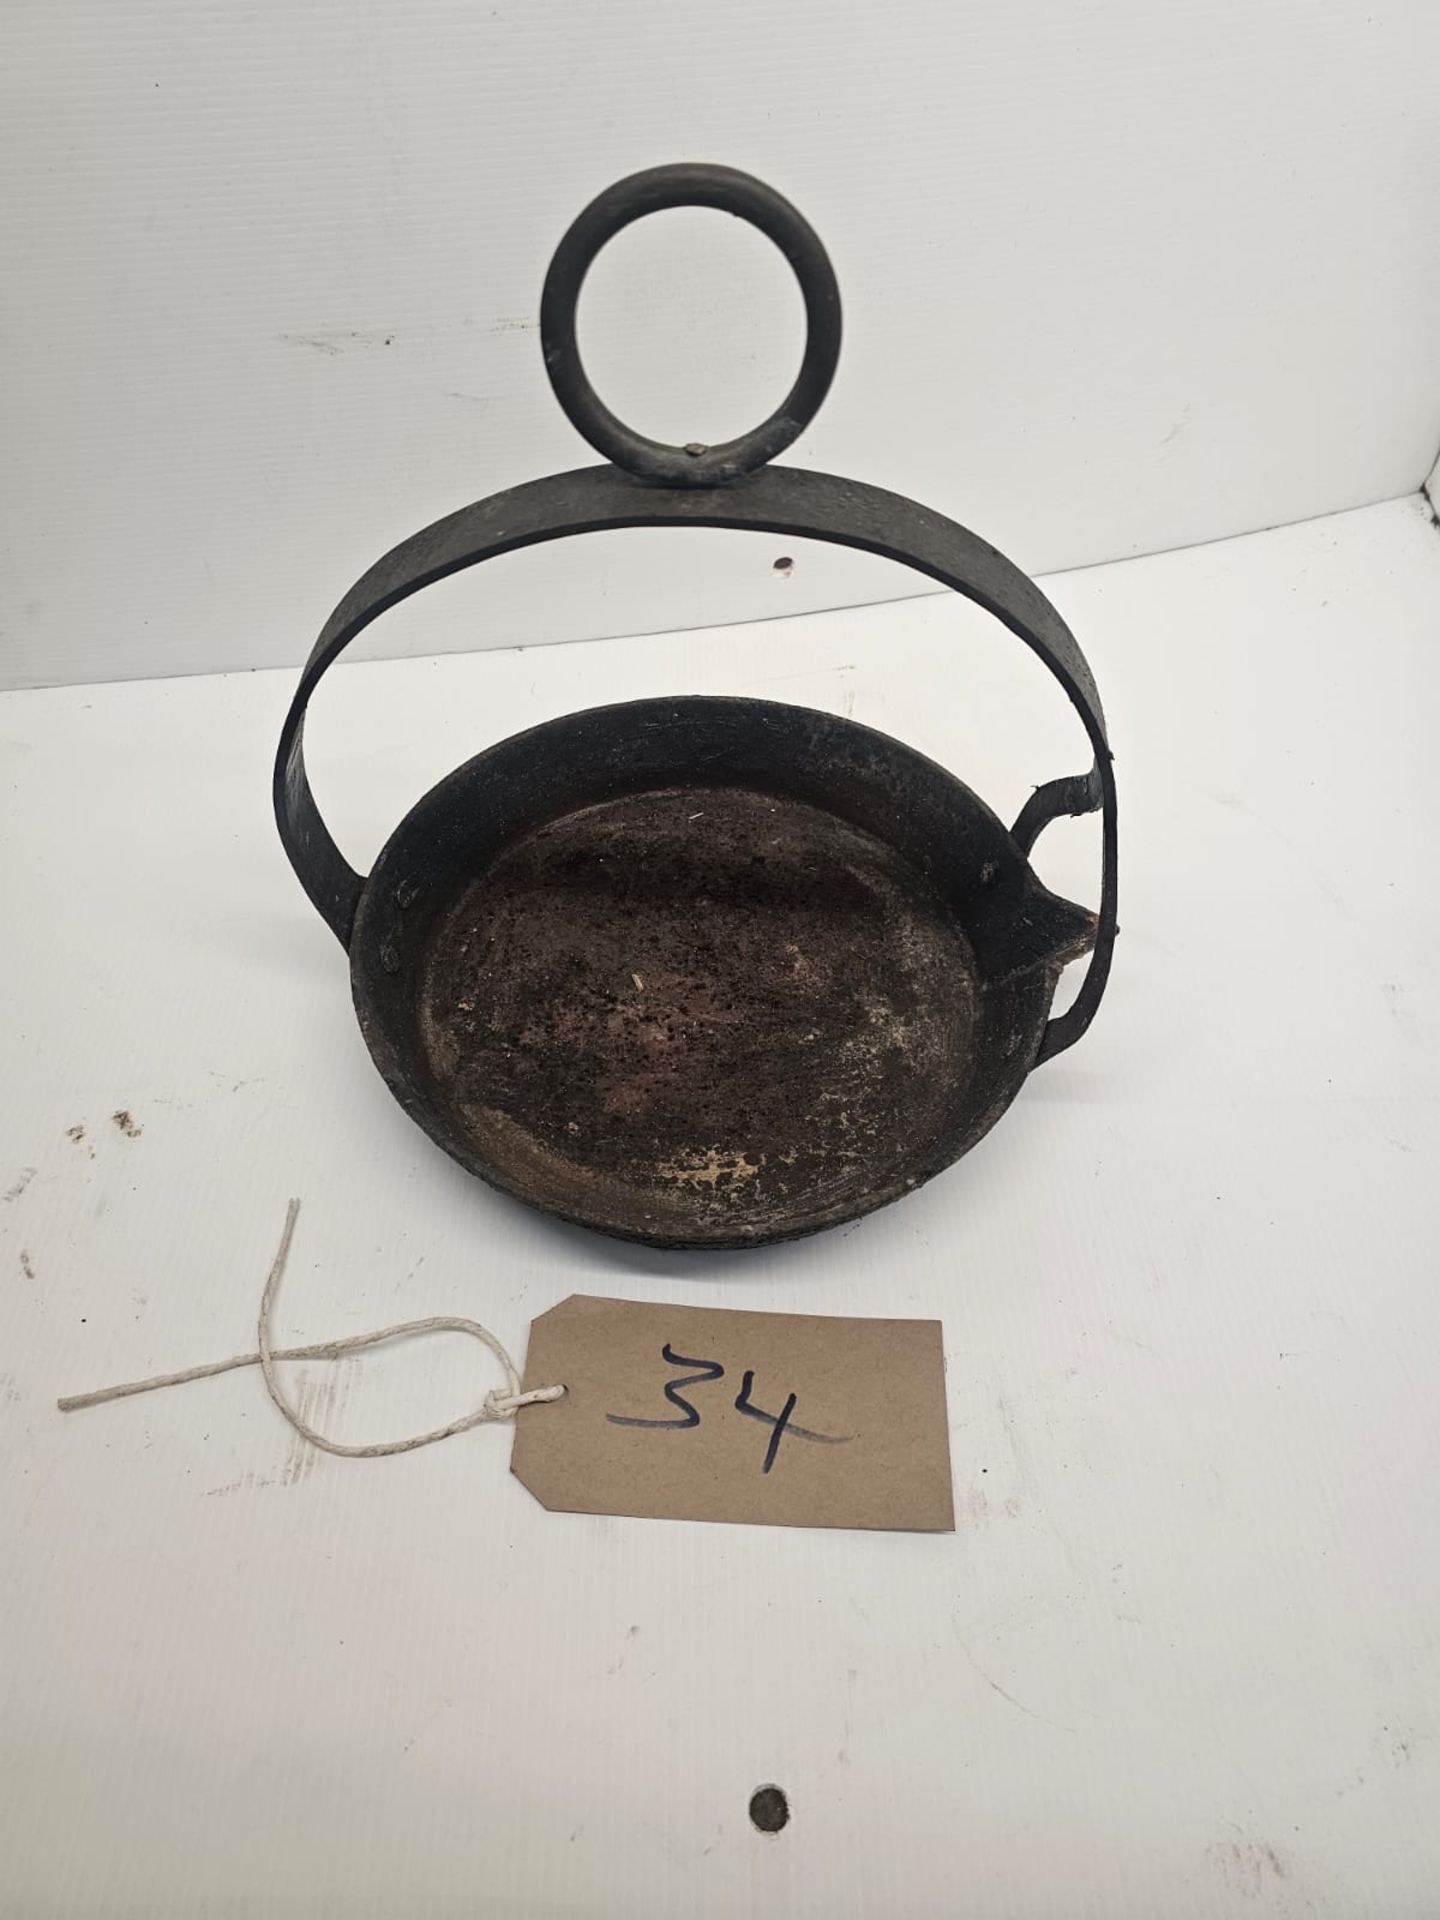 9" cast iron gypsy frying pan. - Image 2 of 2